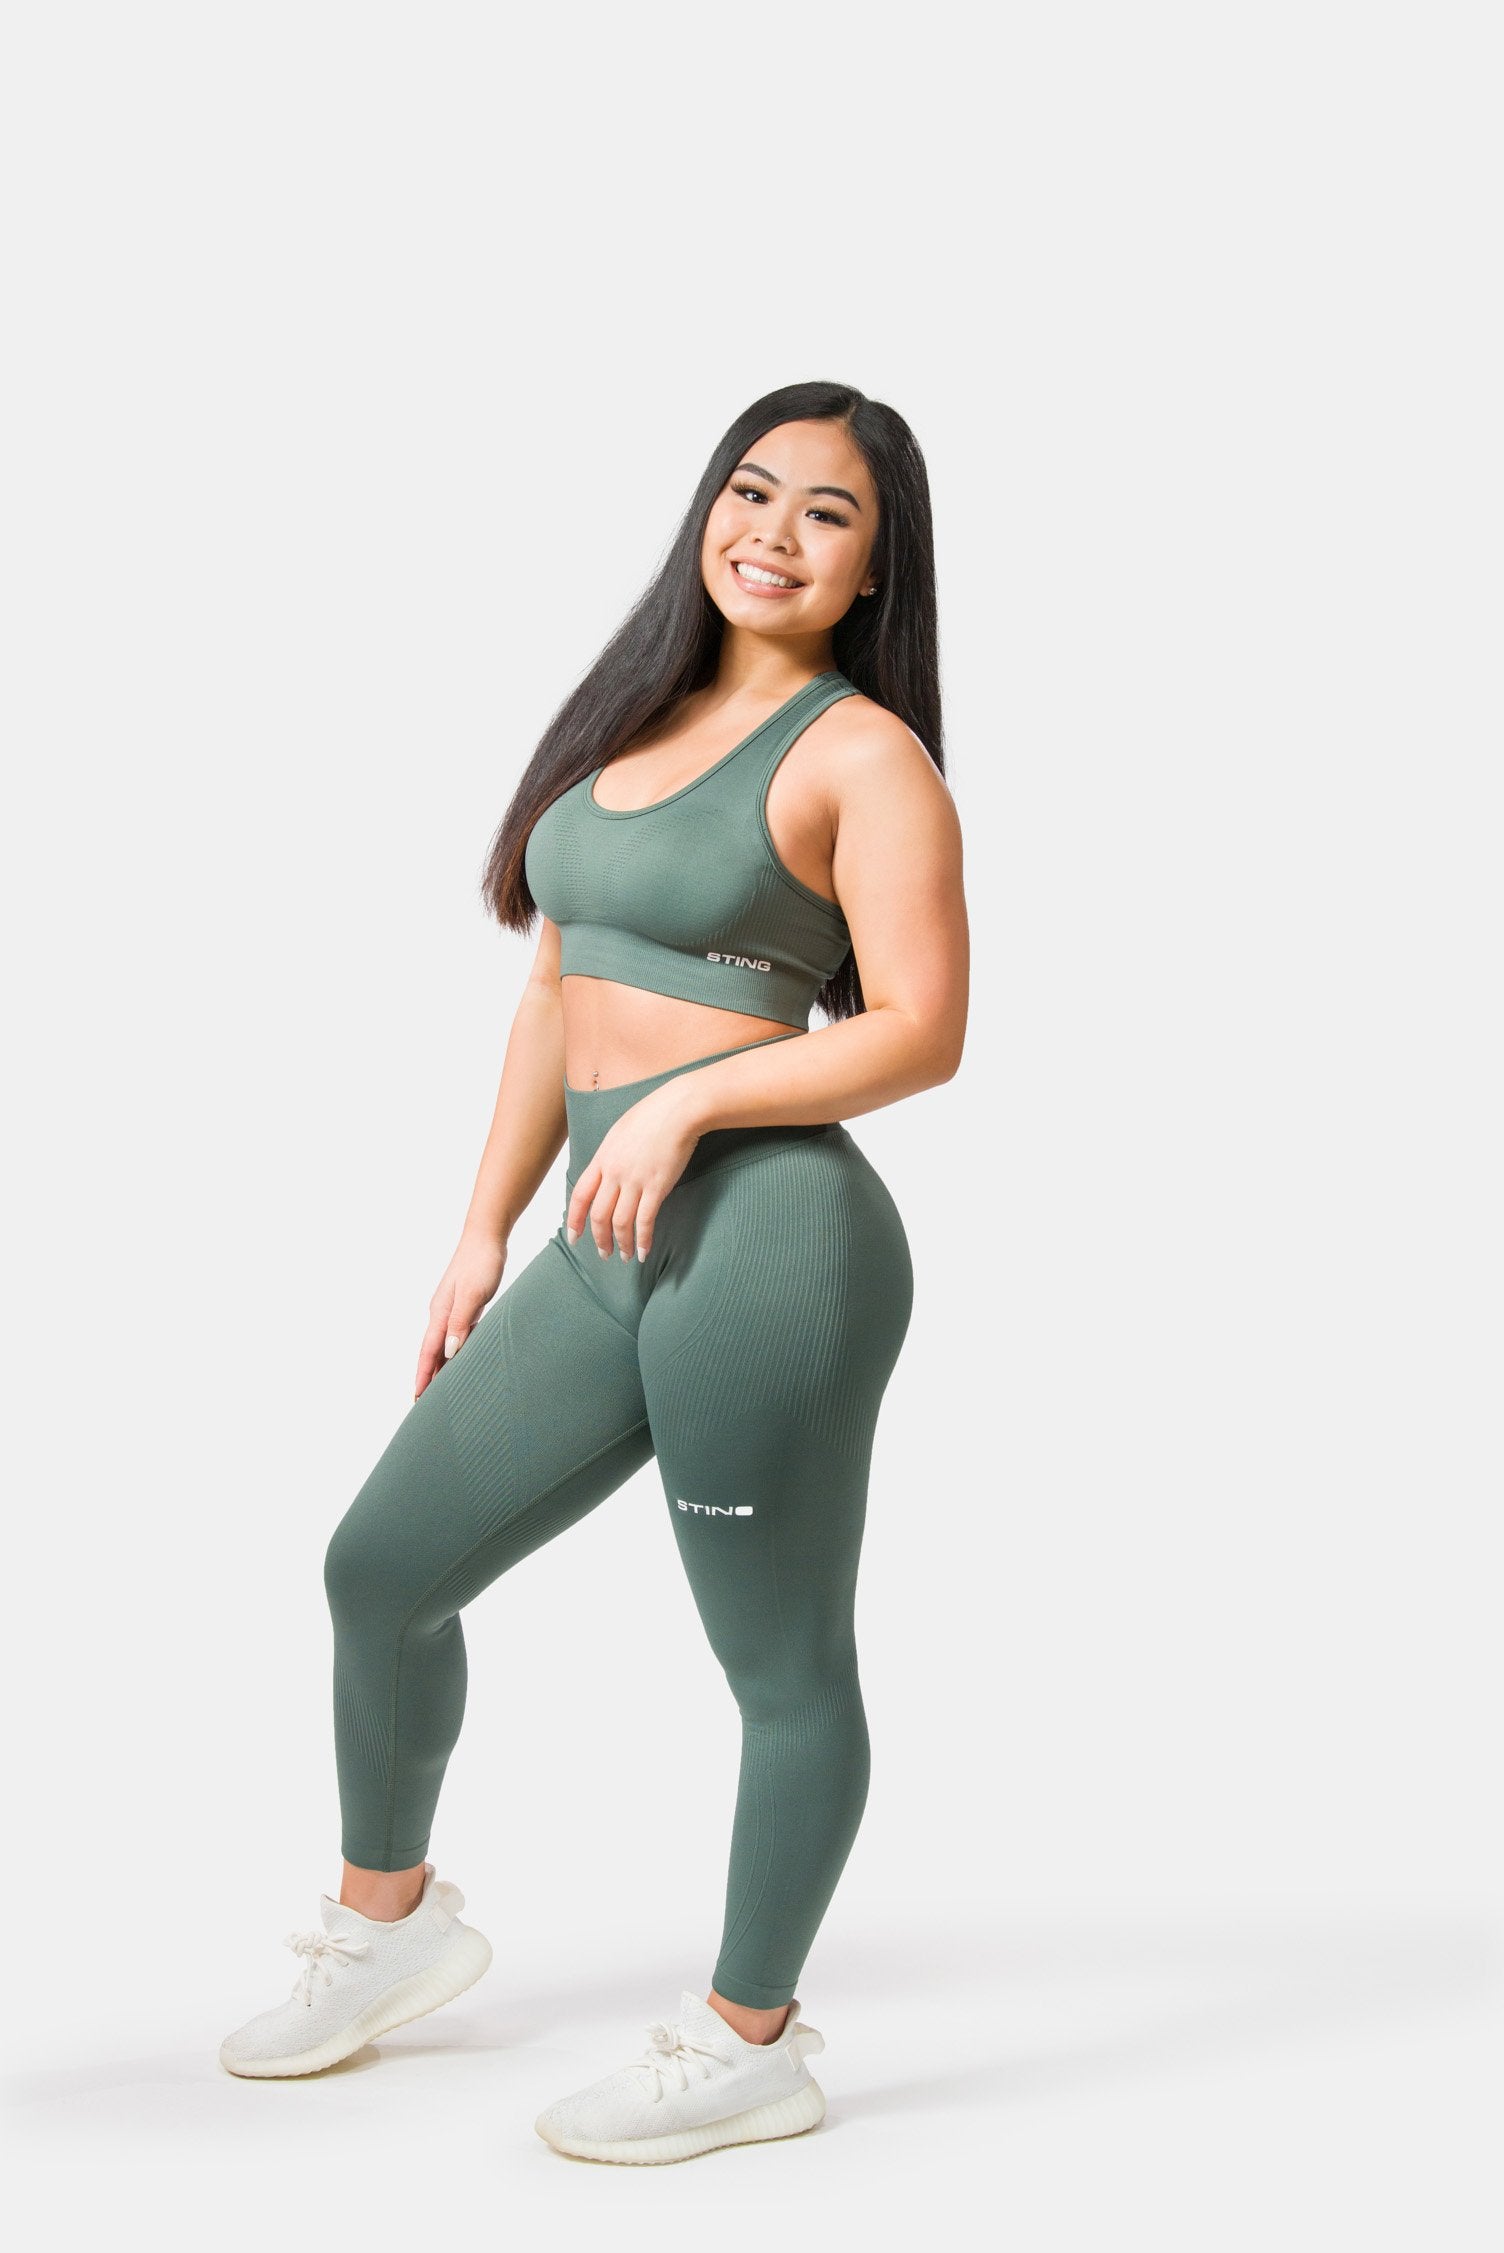 Cotonie Womens Activewear in Womens Clothing